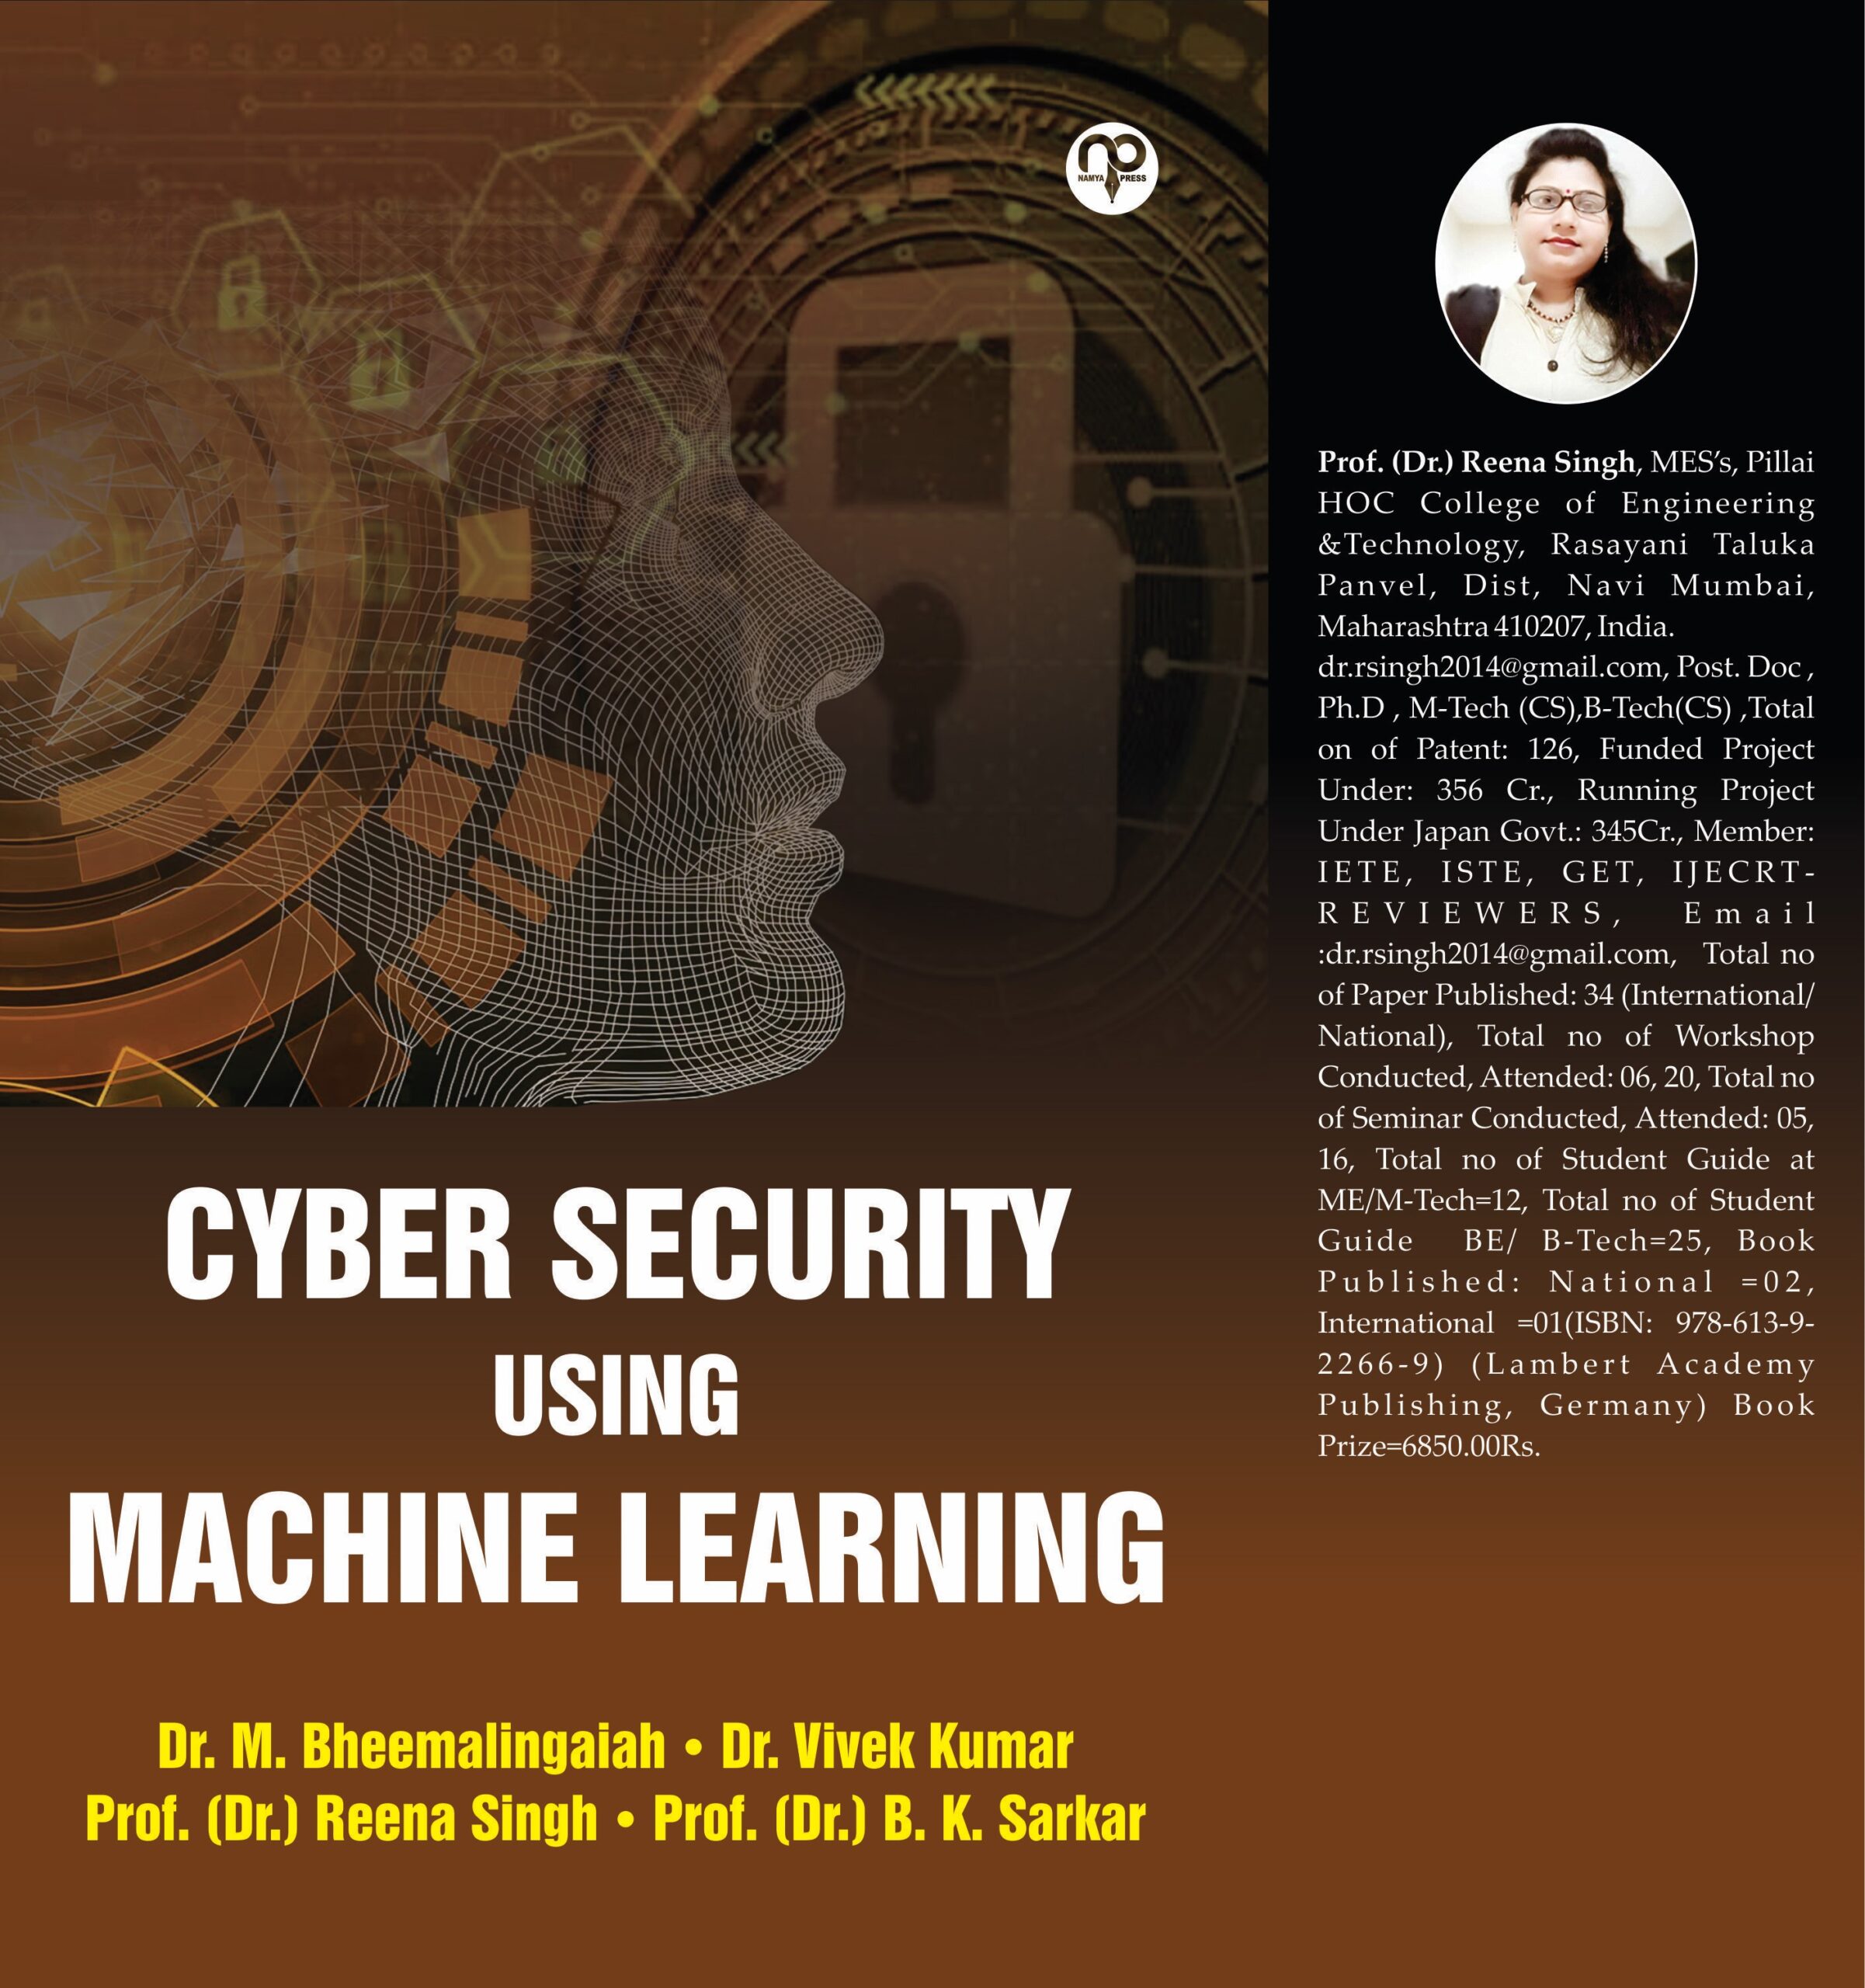 Cyber Security using Machine Learning